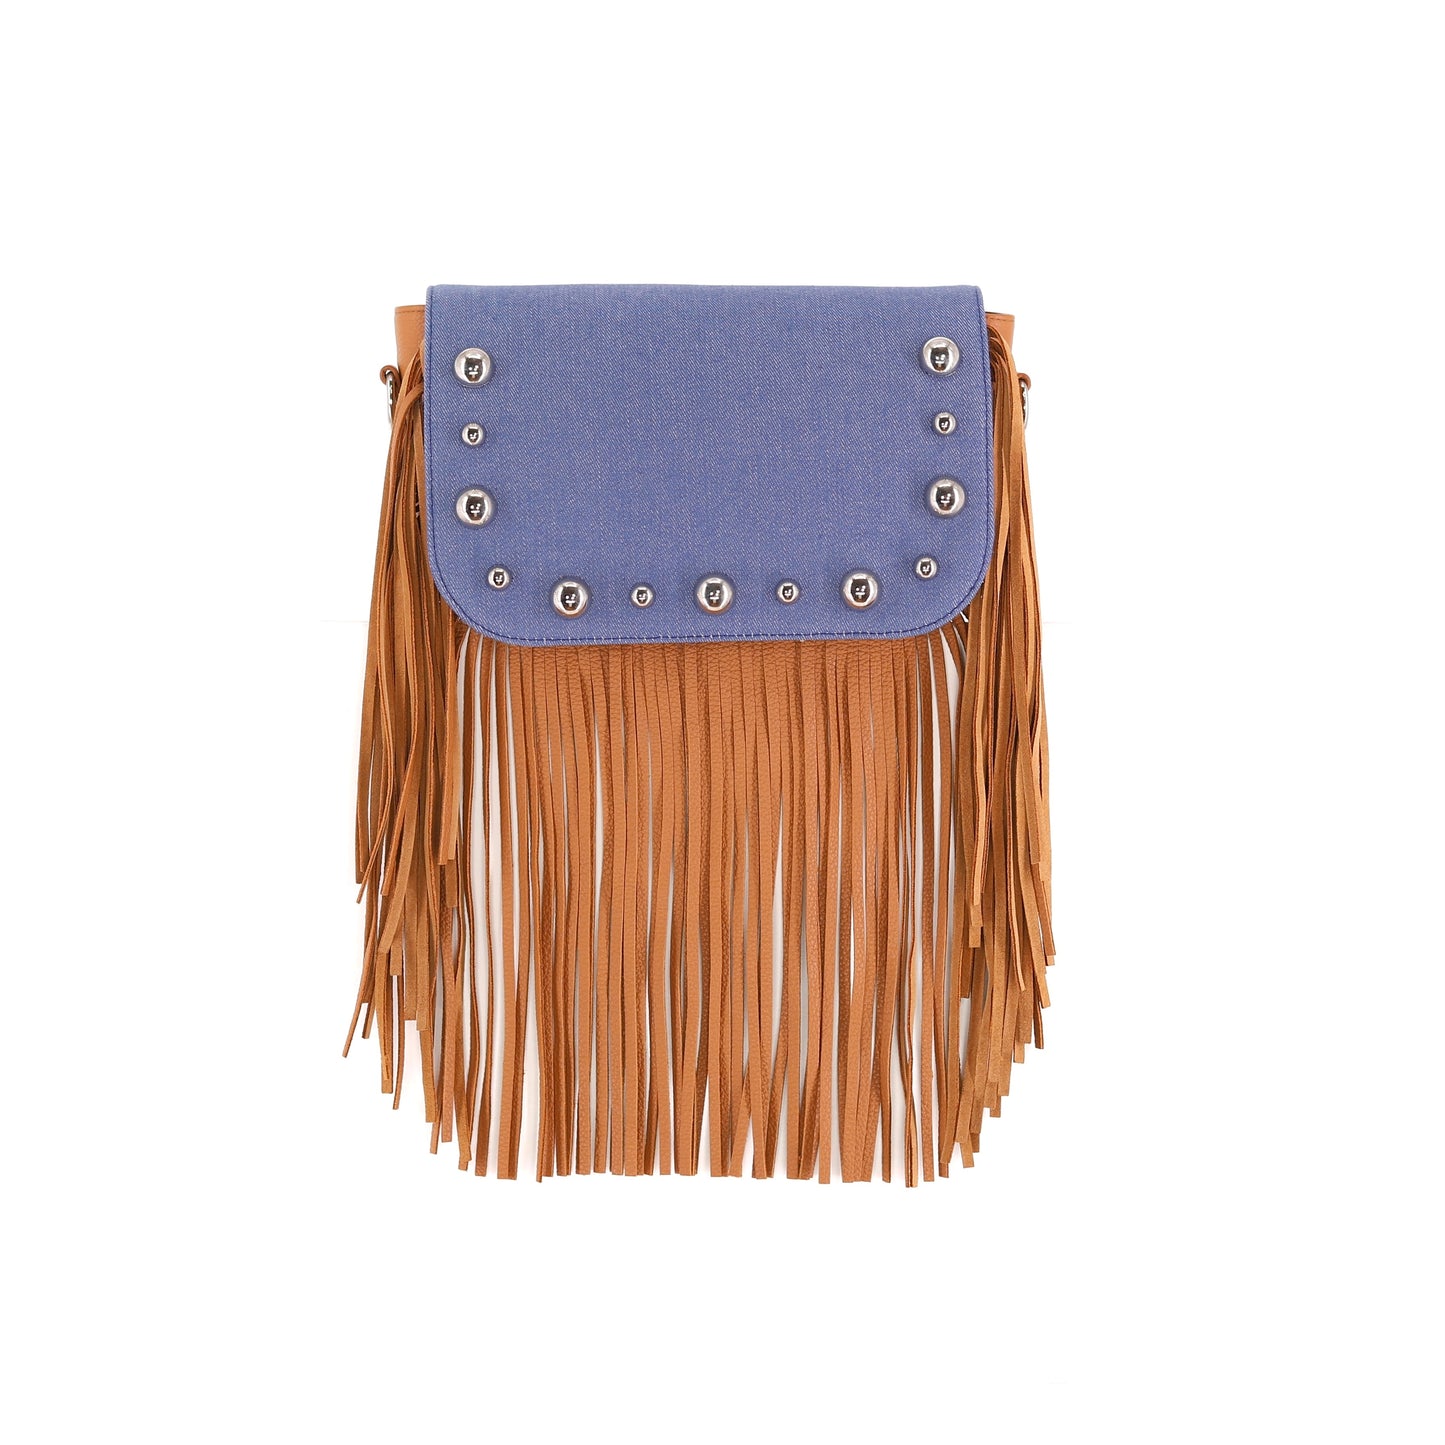 GABRIELLE handbag with fringes genuine leather caramel small